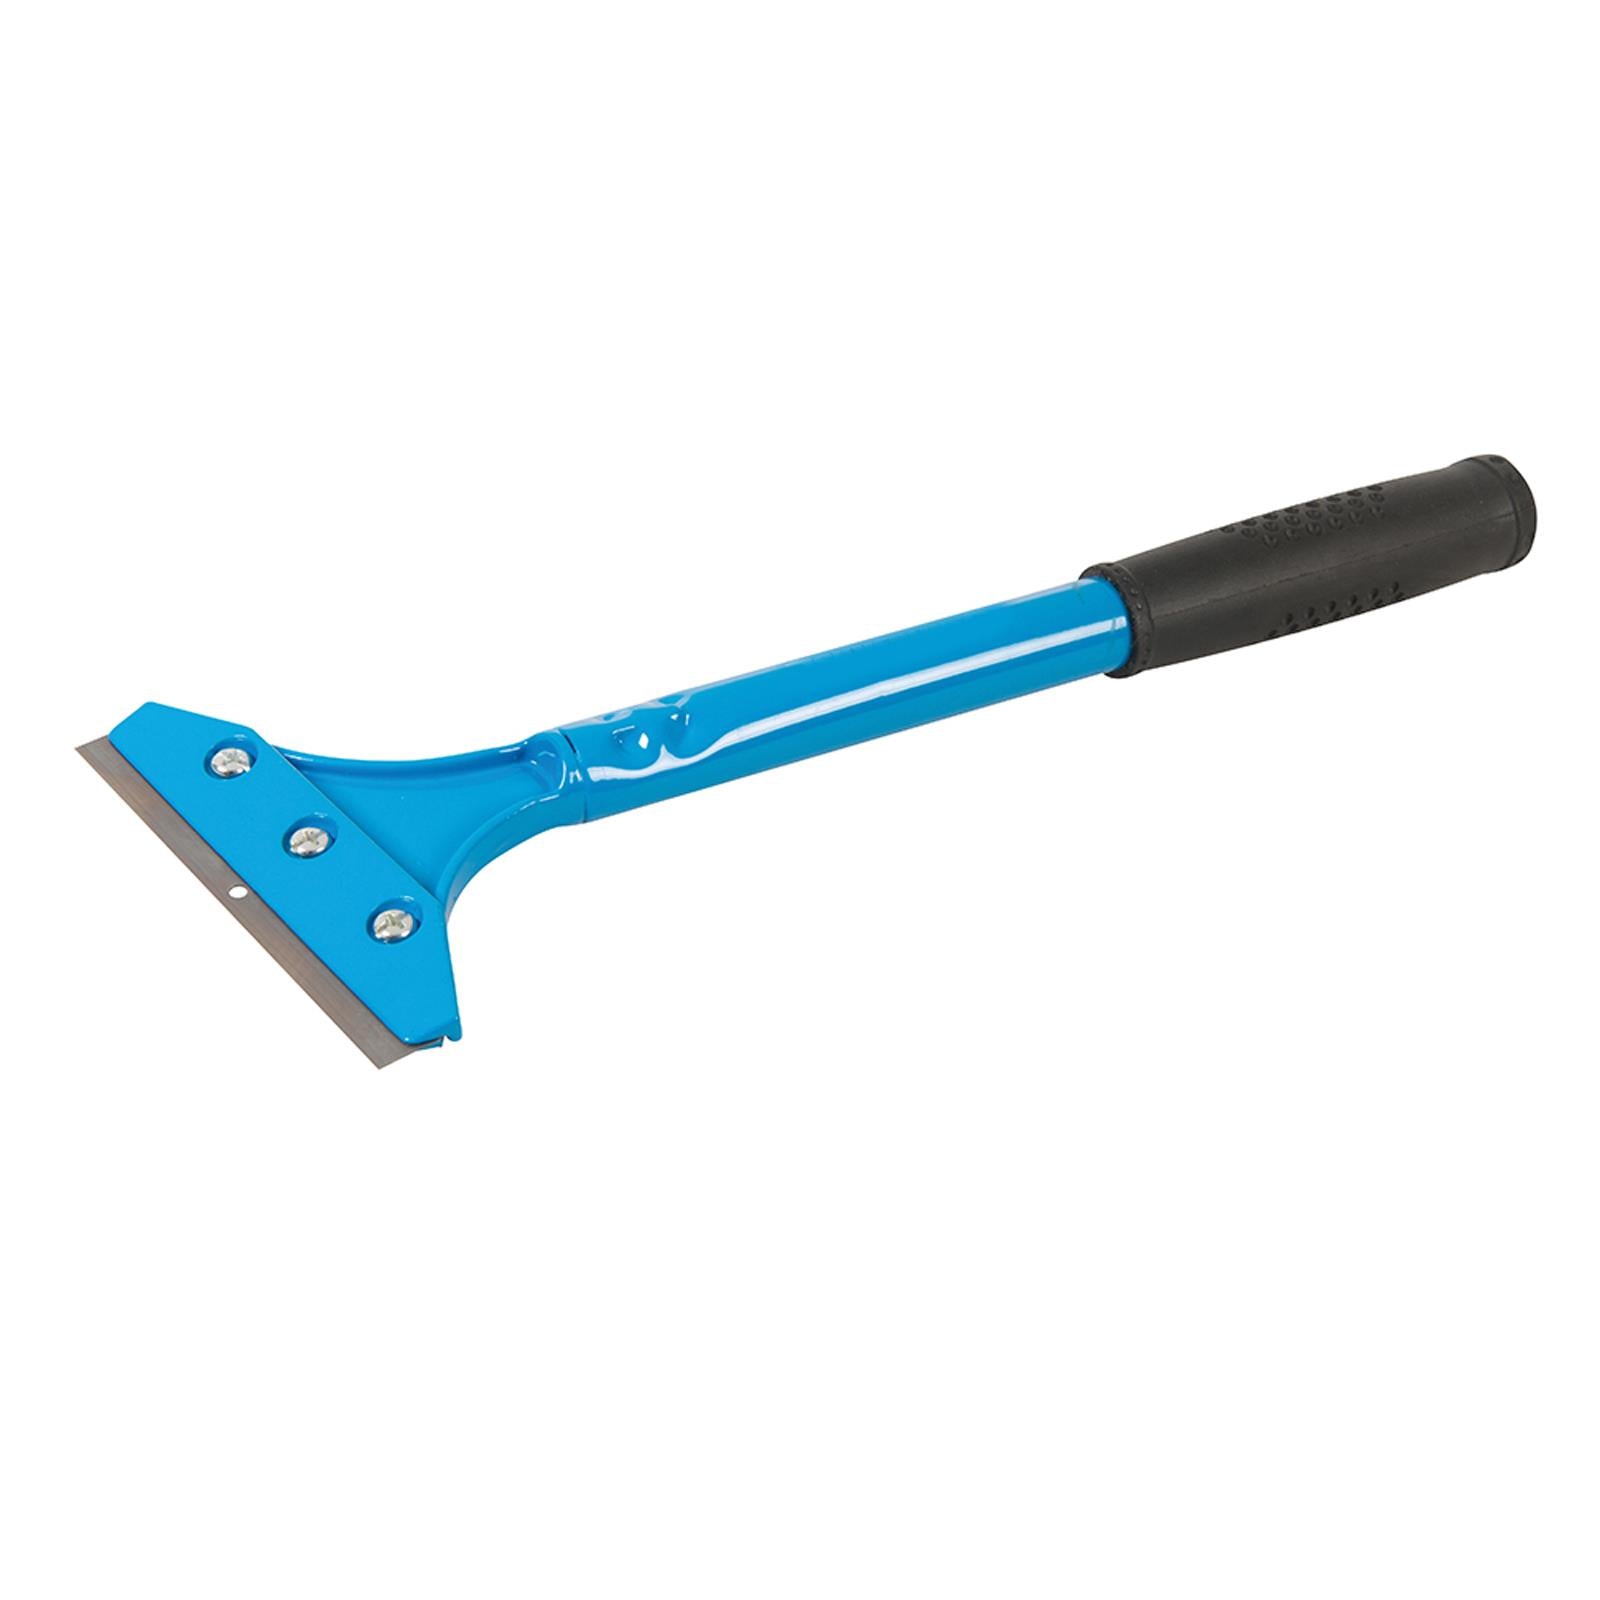 Heavy Duty Scraper 100mm Blade For Removing Paint, Wall Coverings & Floor Tiles